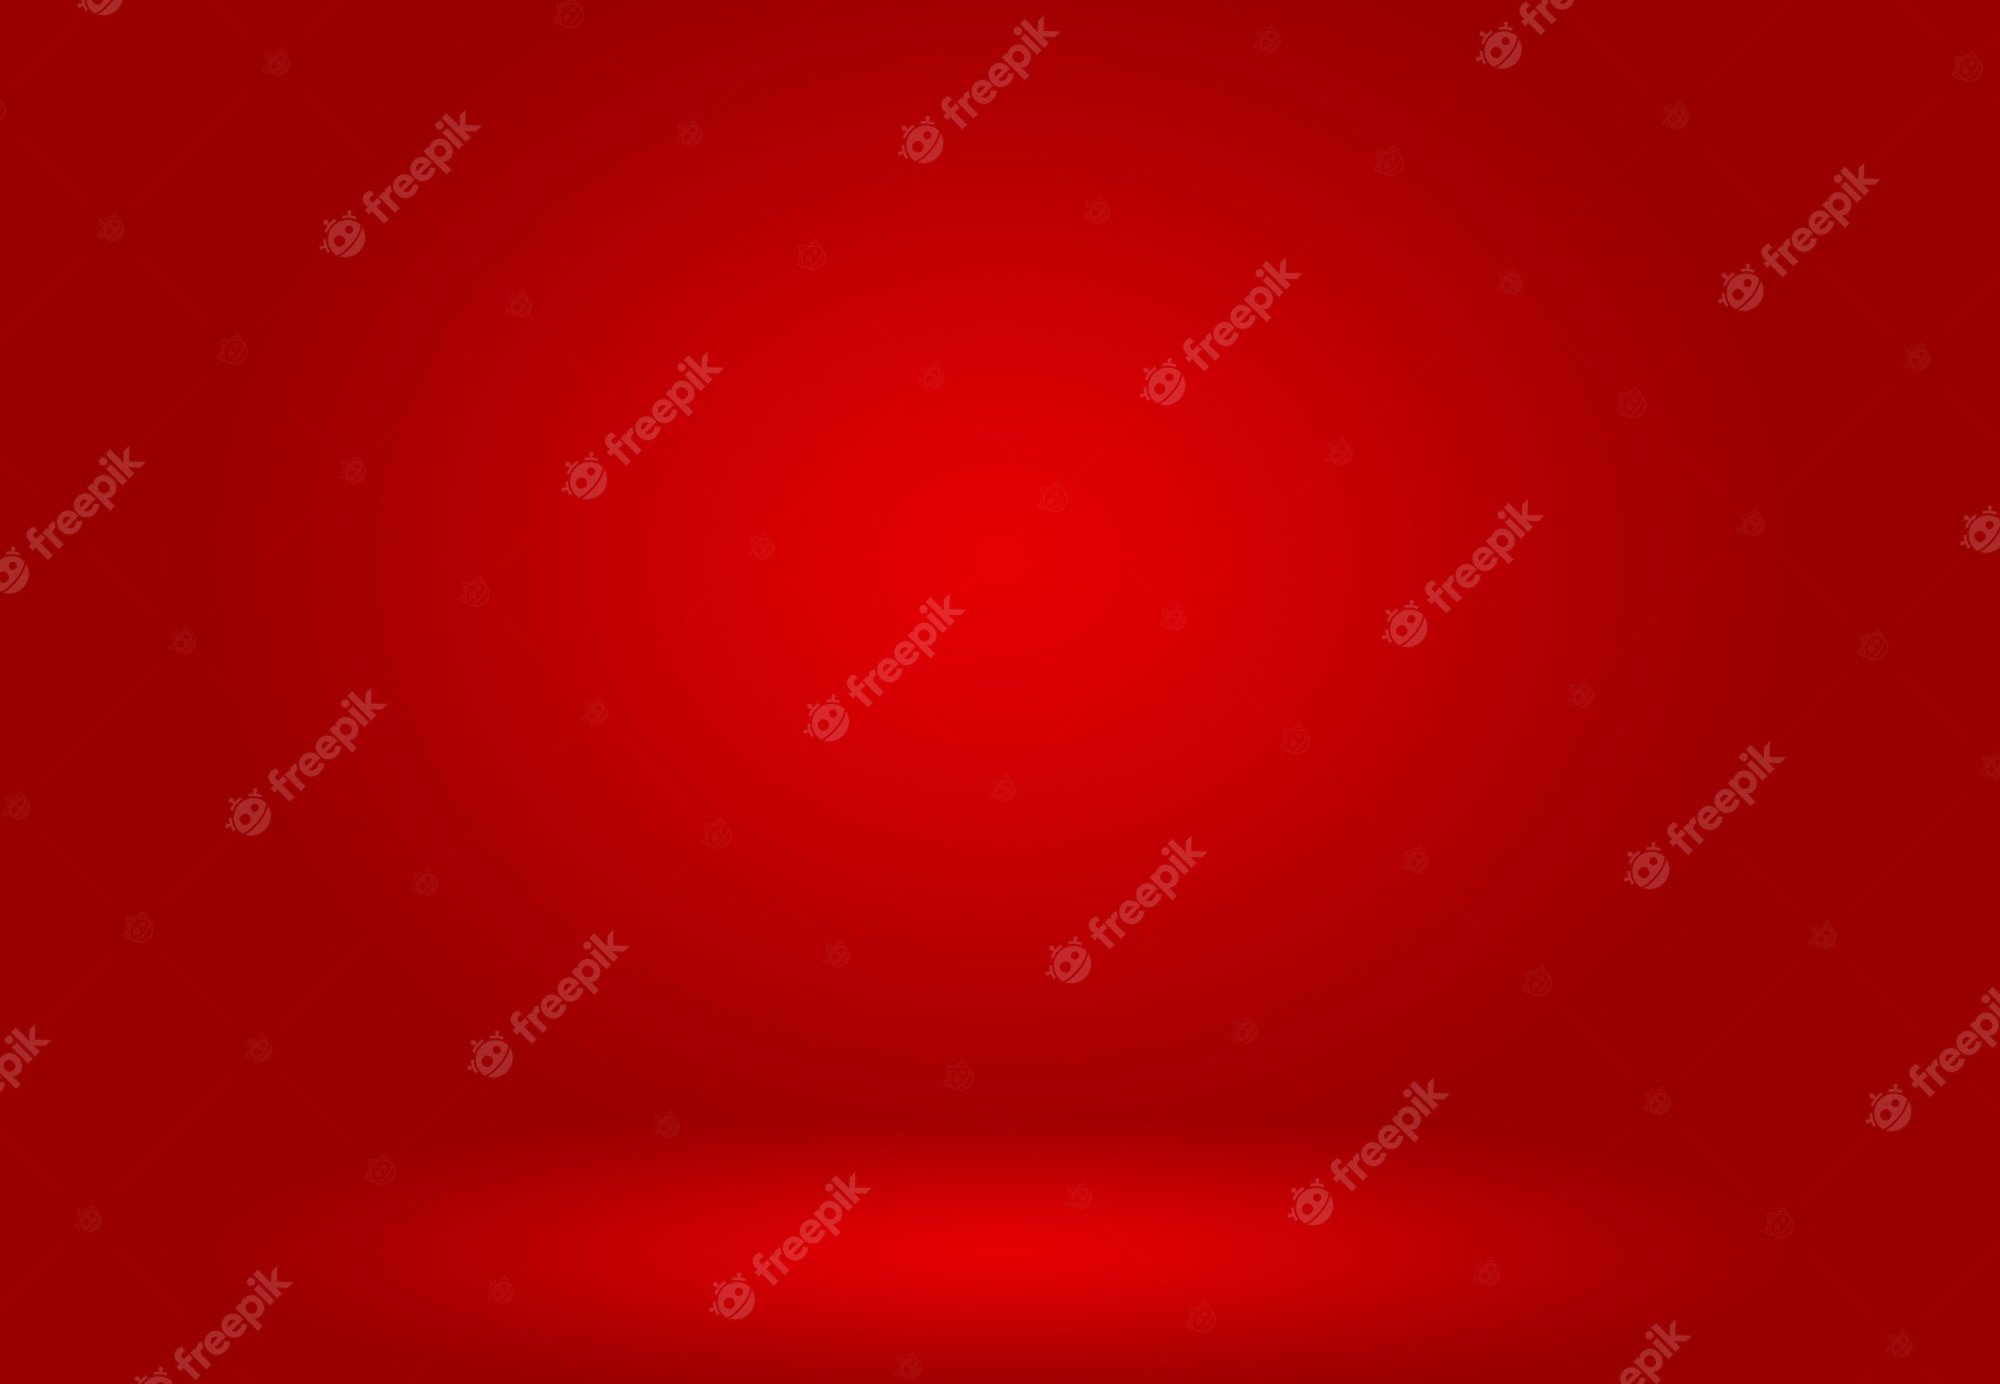 Red Background Image